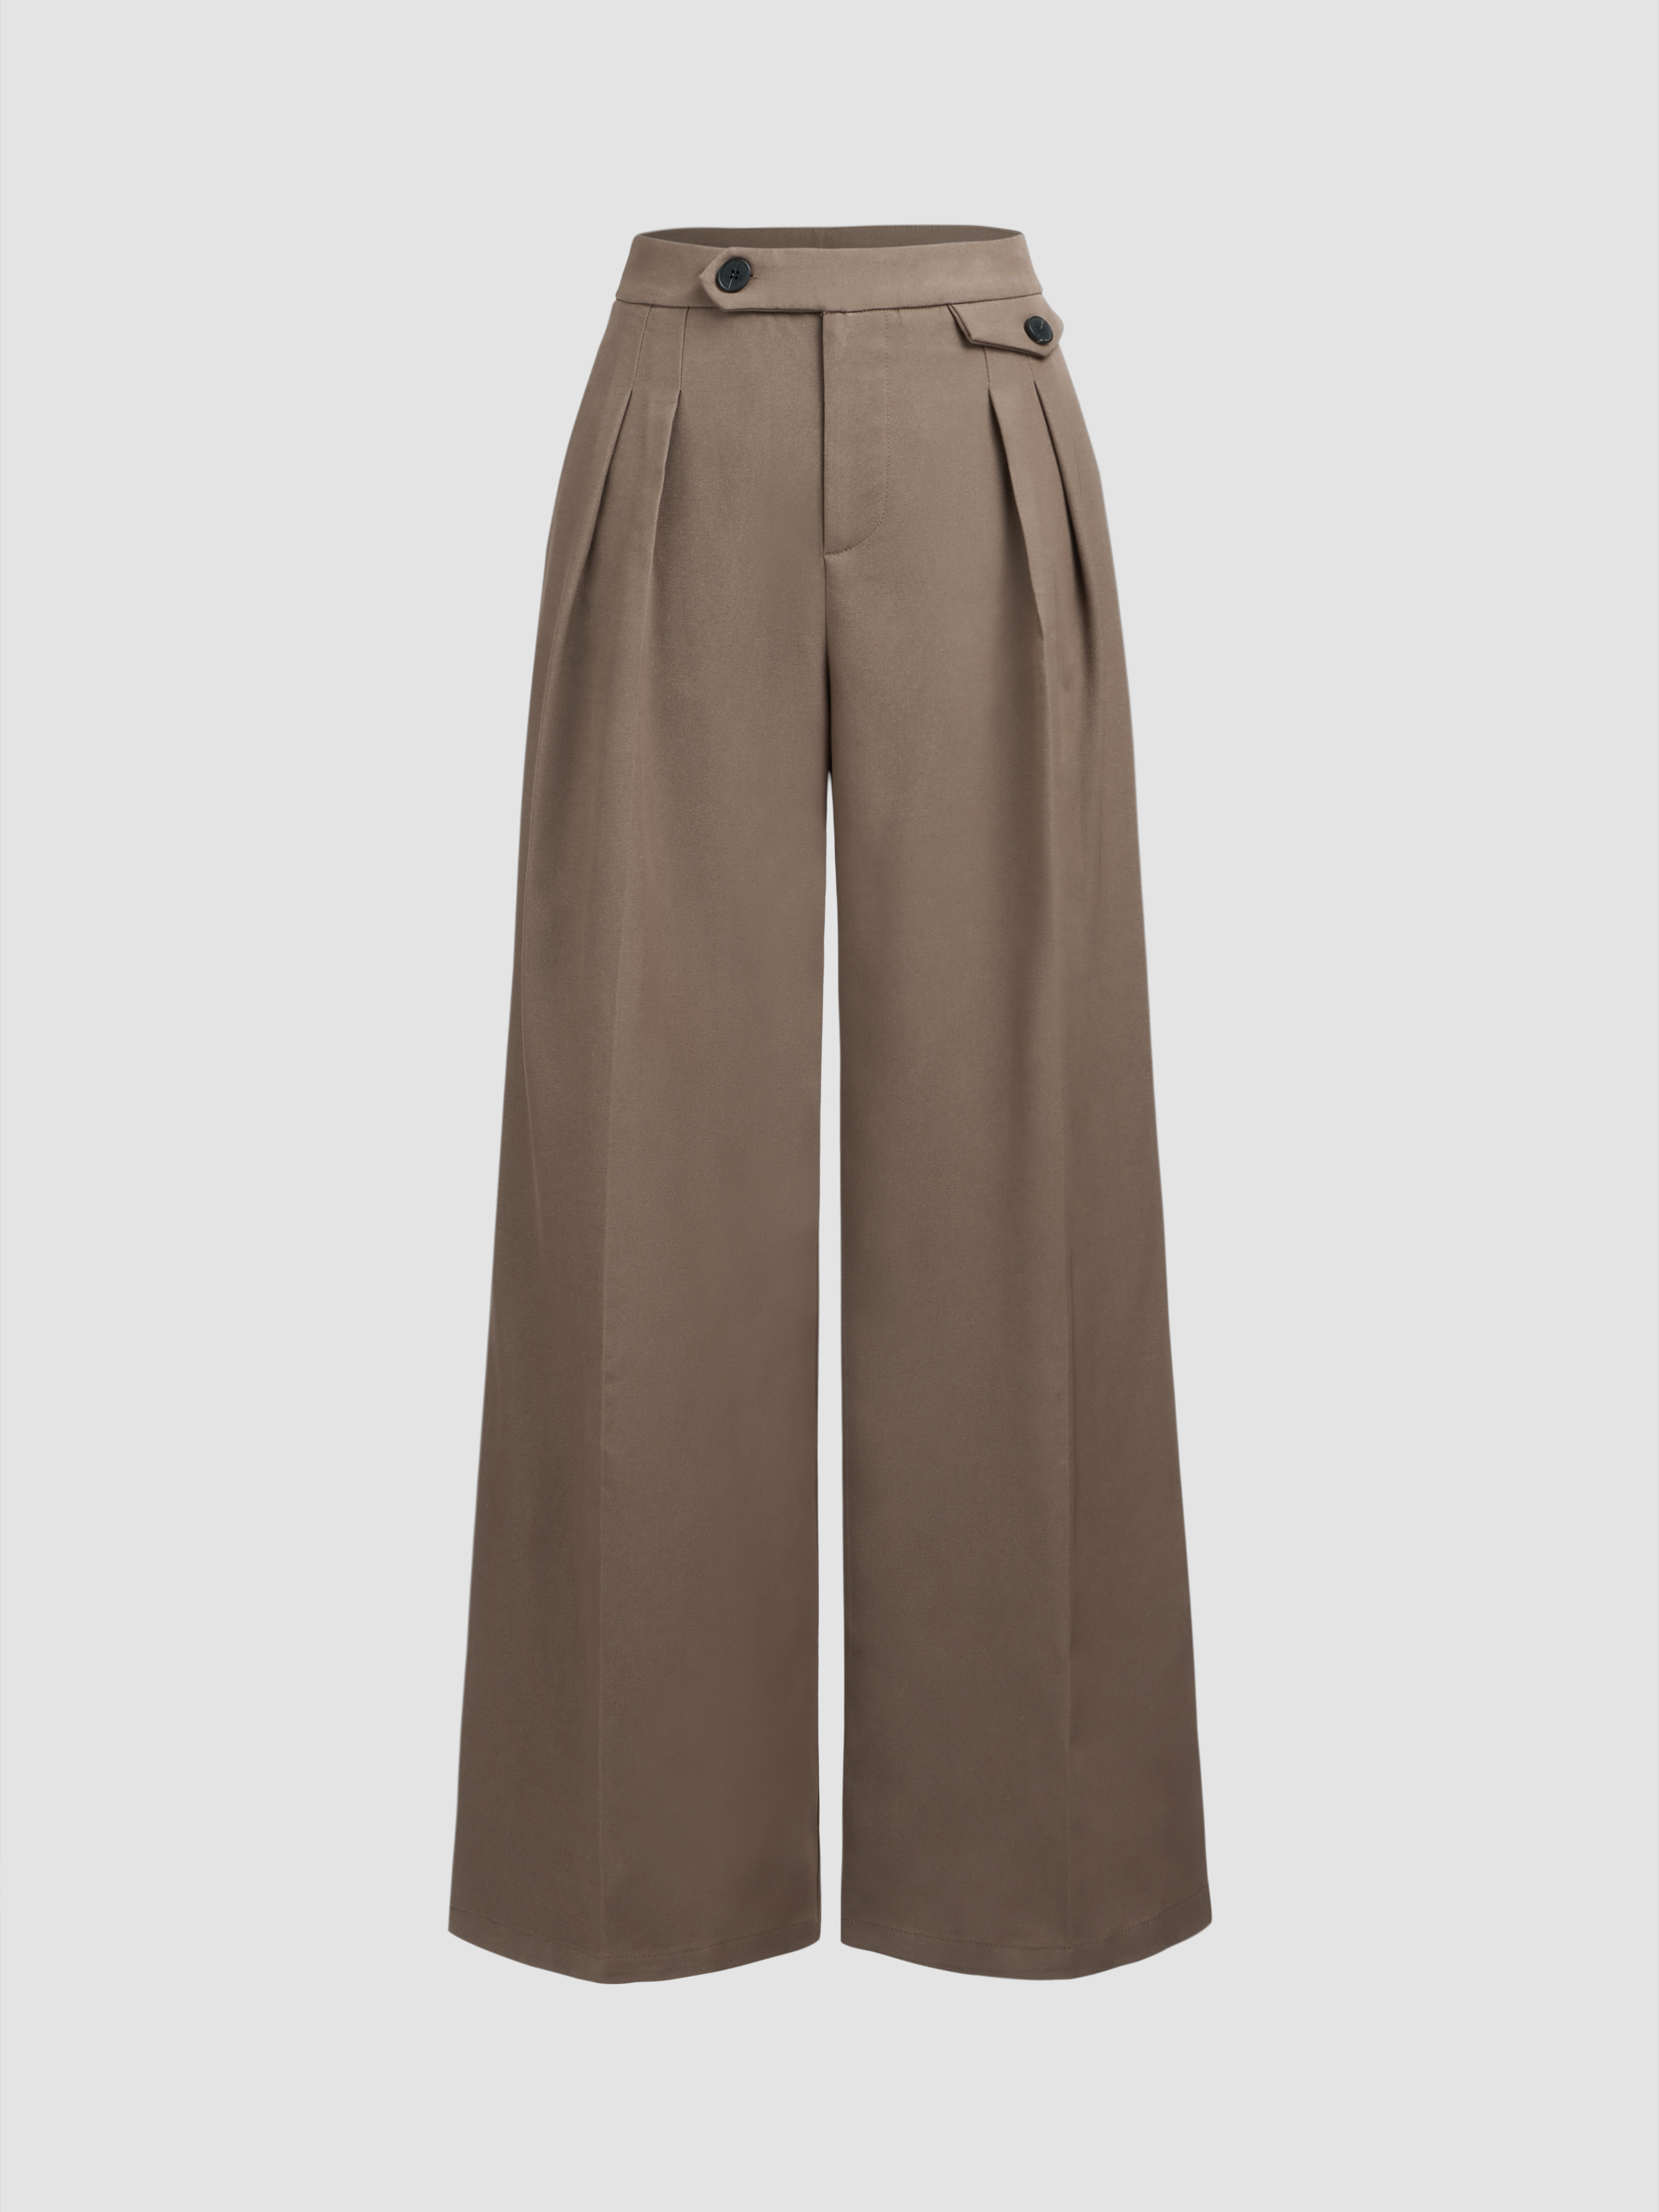 Woven Mid Waist Solid Button Straight Leg Trousers